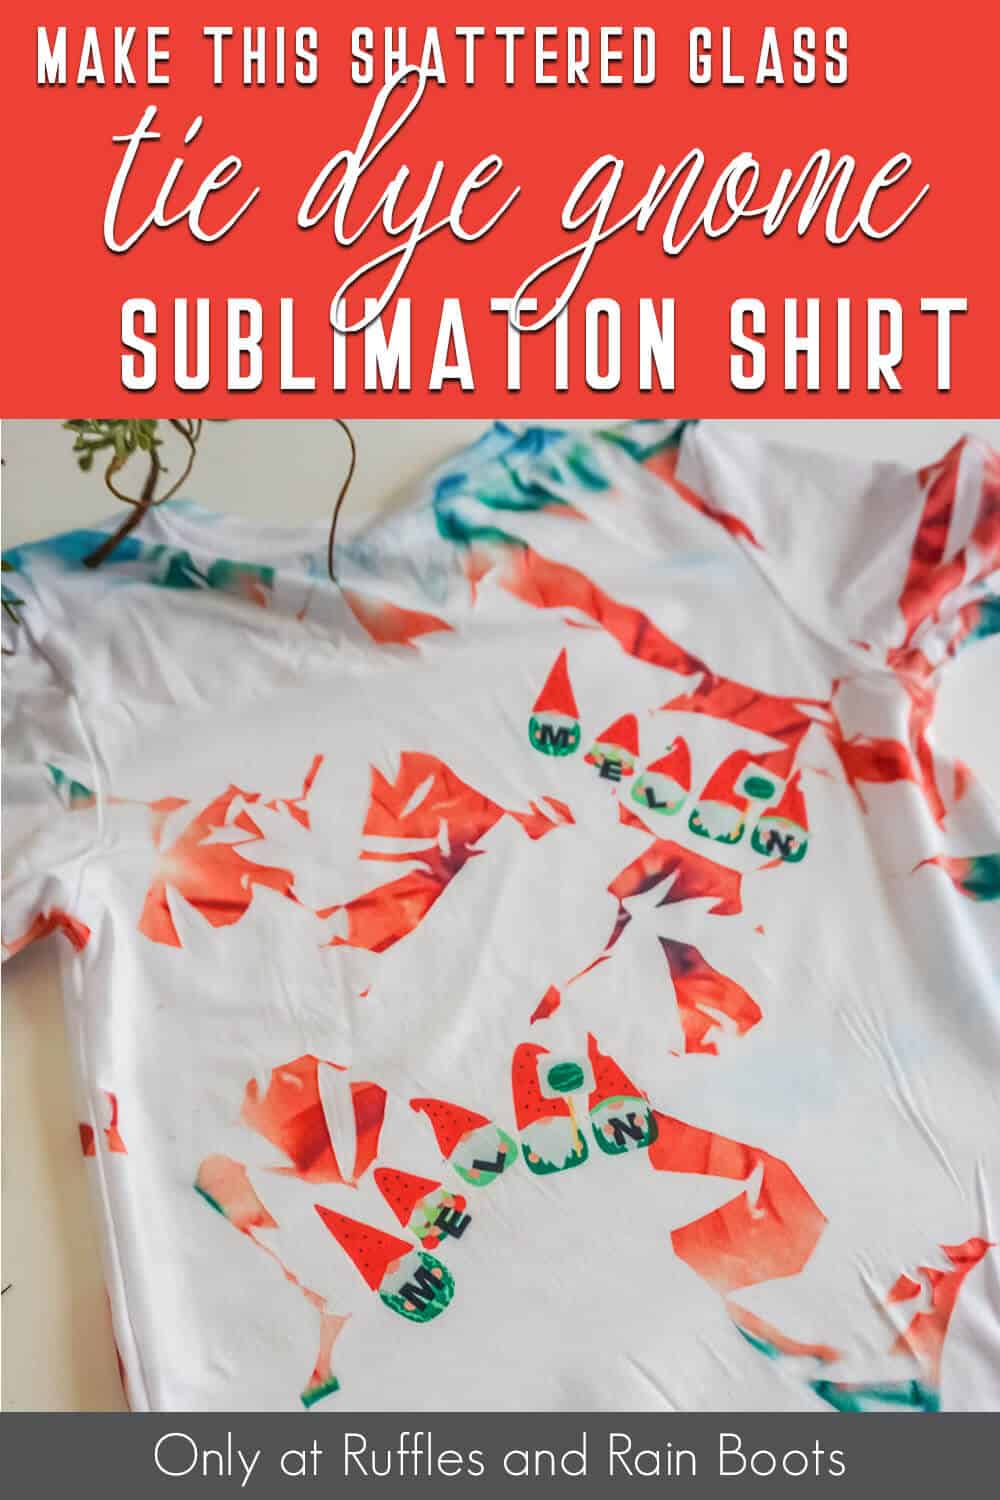 tik tok shattered glass sublimation shirt with gnomes with text which reads make this shattered glass tie dye gnome sublimation shirt